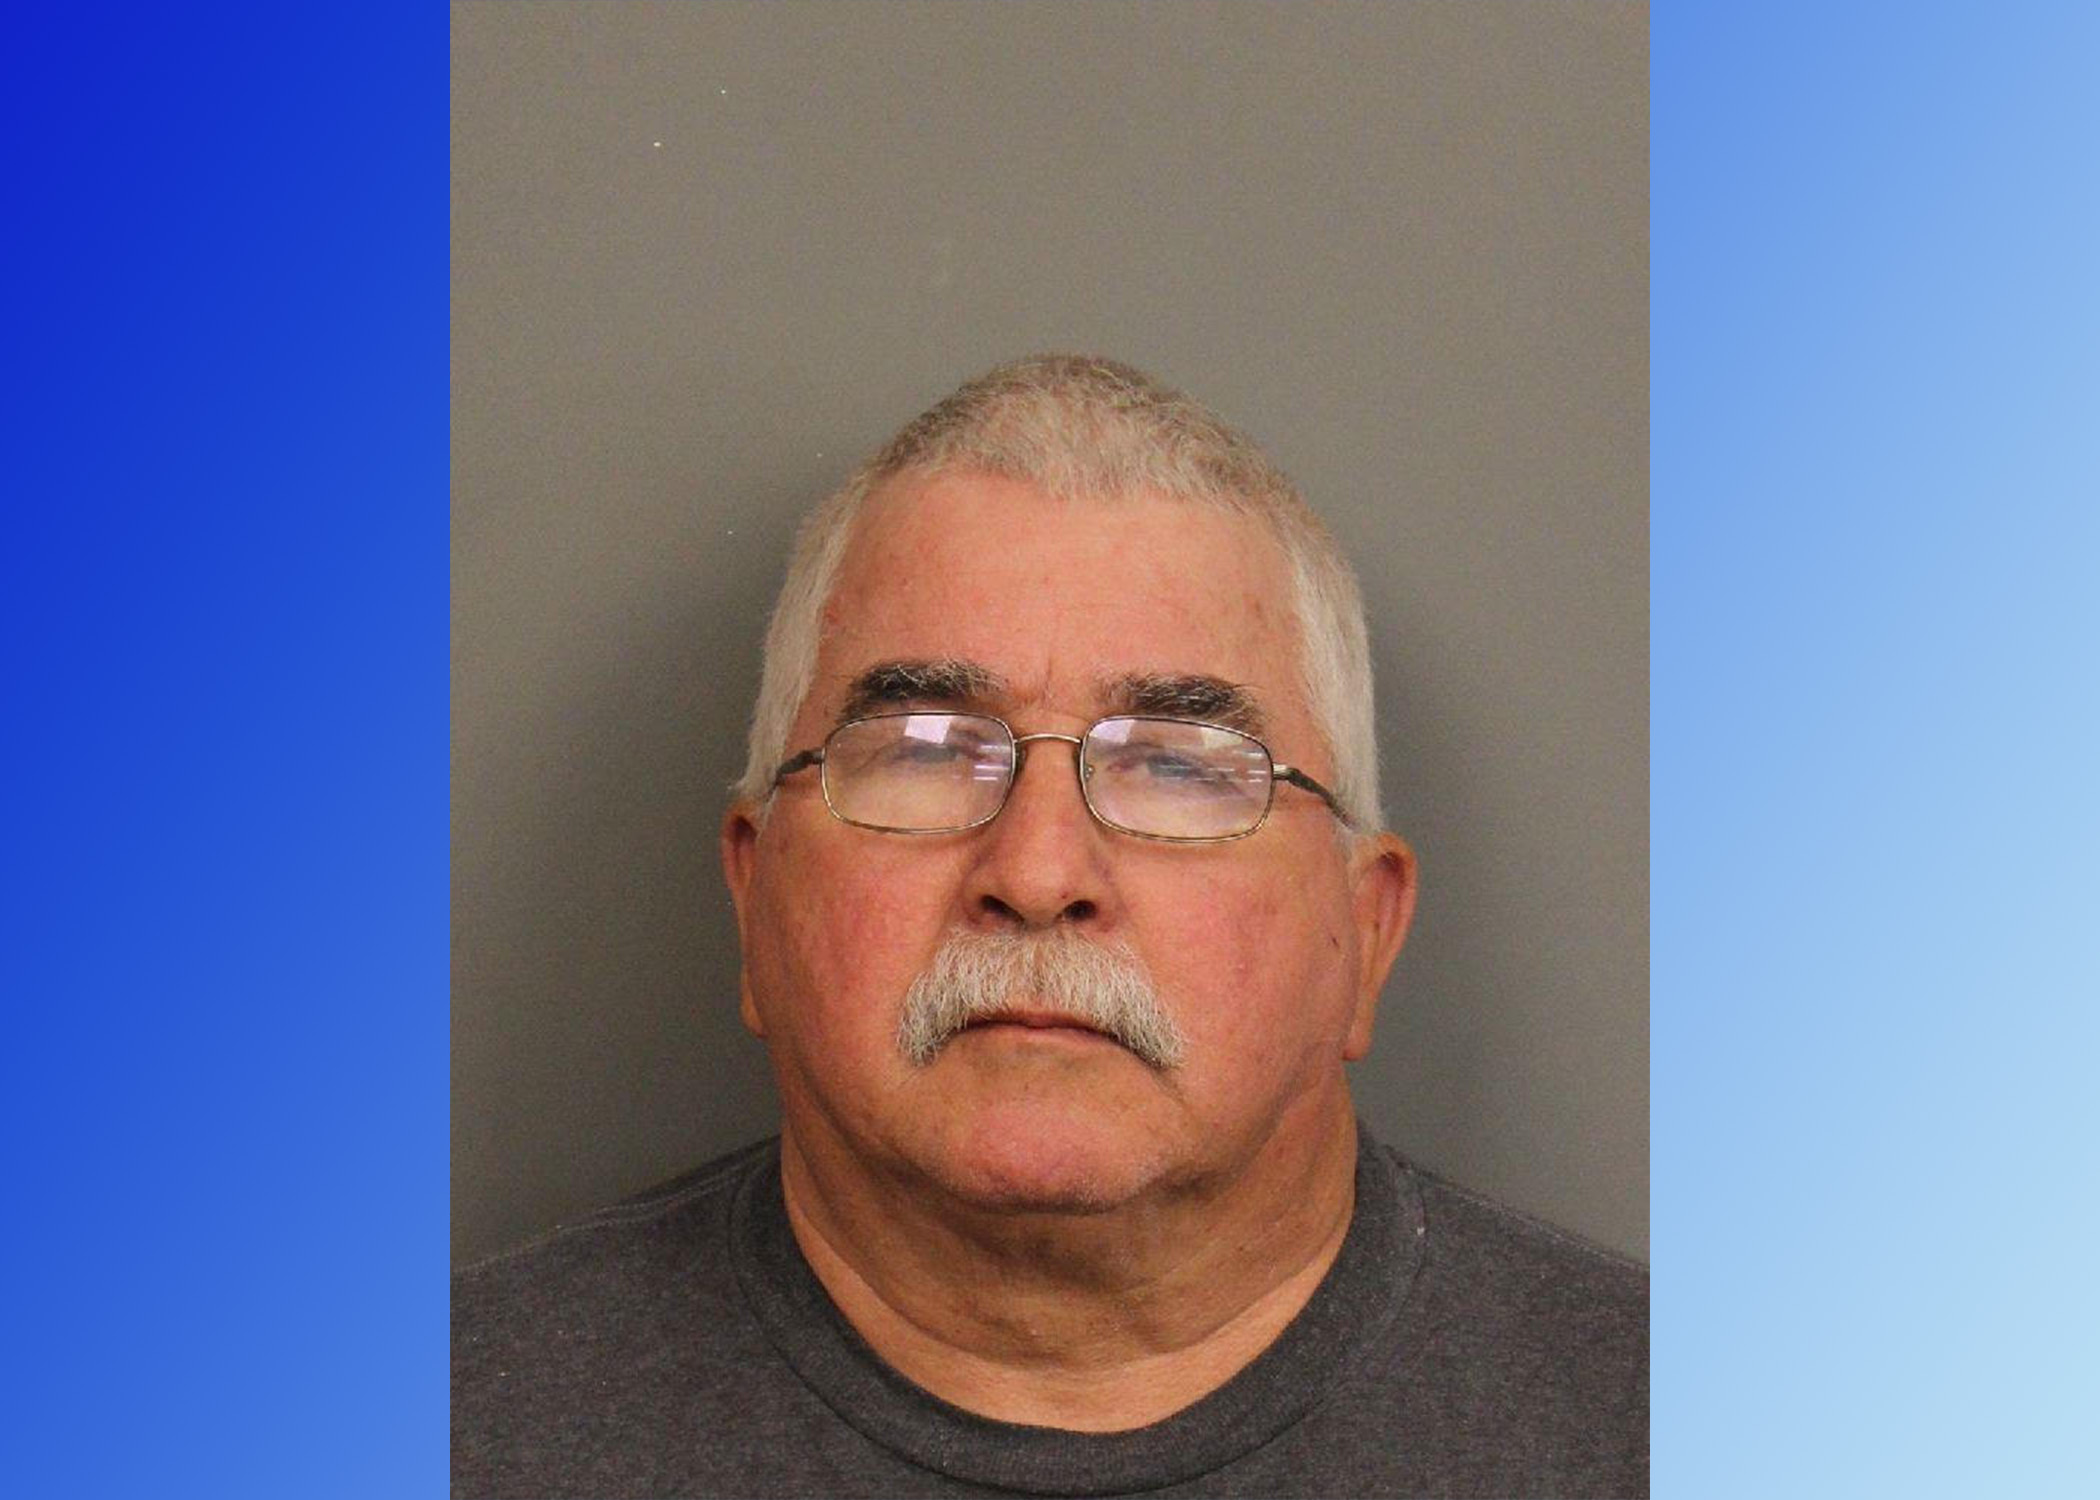 Trussville man charged with possession of child pornography